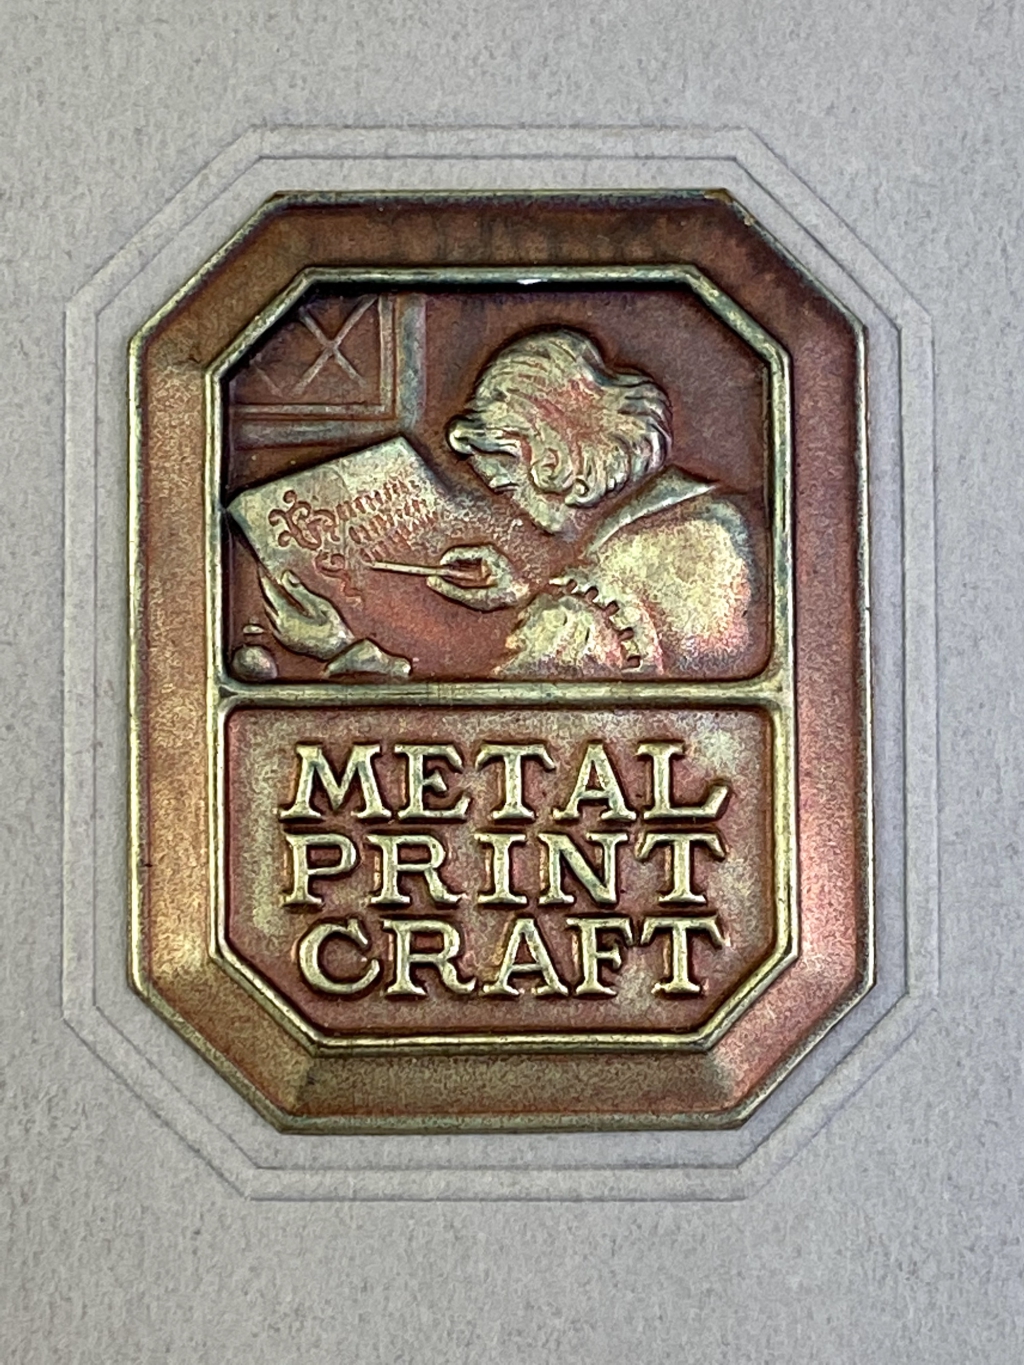 Enlargement to show detail of embossed metal emblem of a scribe writing a manuscript published by L. G. Grammes & Sons in 1926.